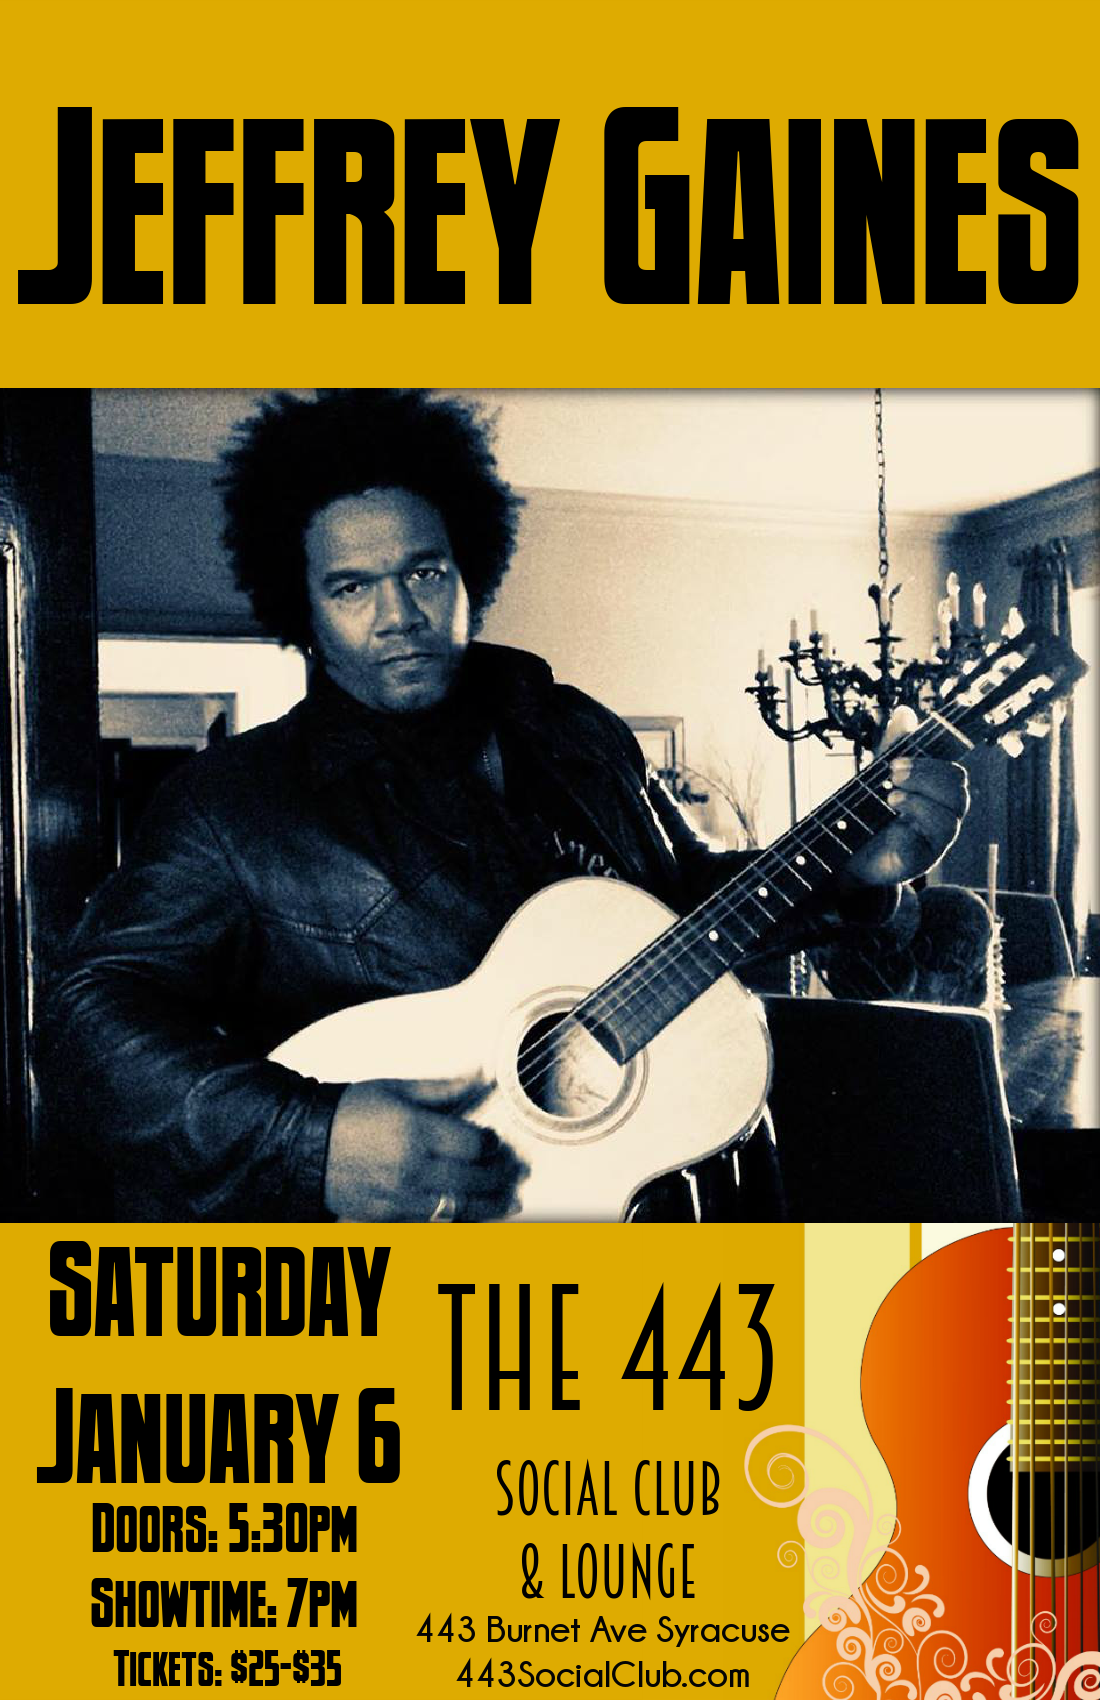 Jeffrey Gaines at the 443